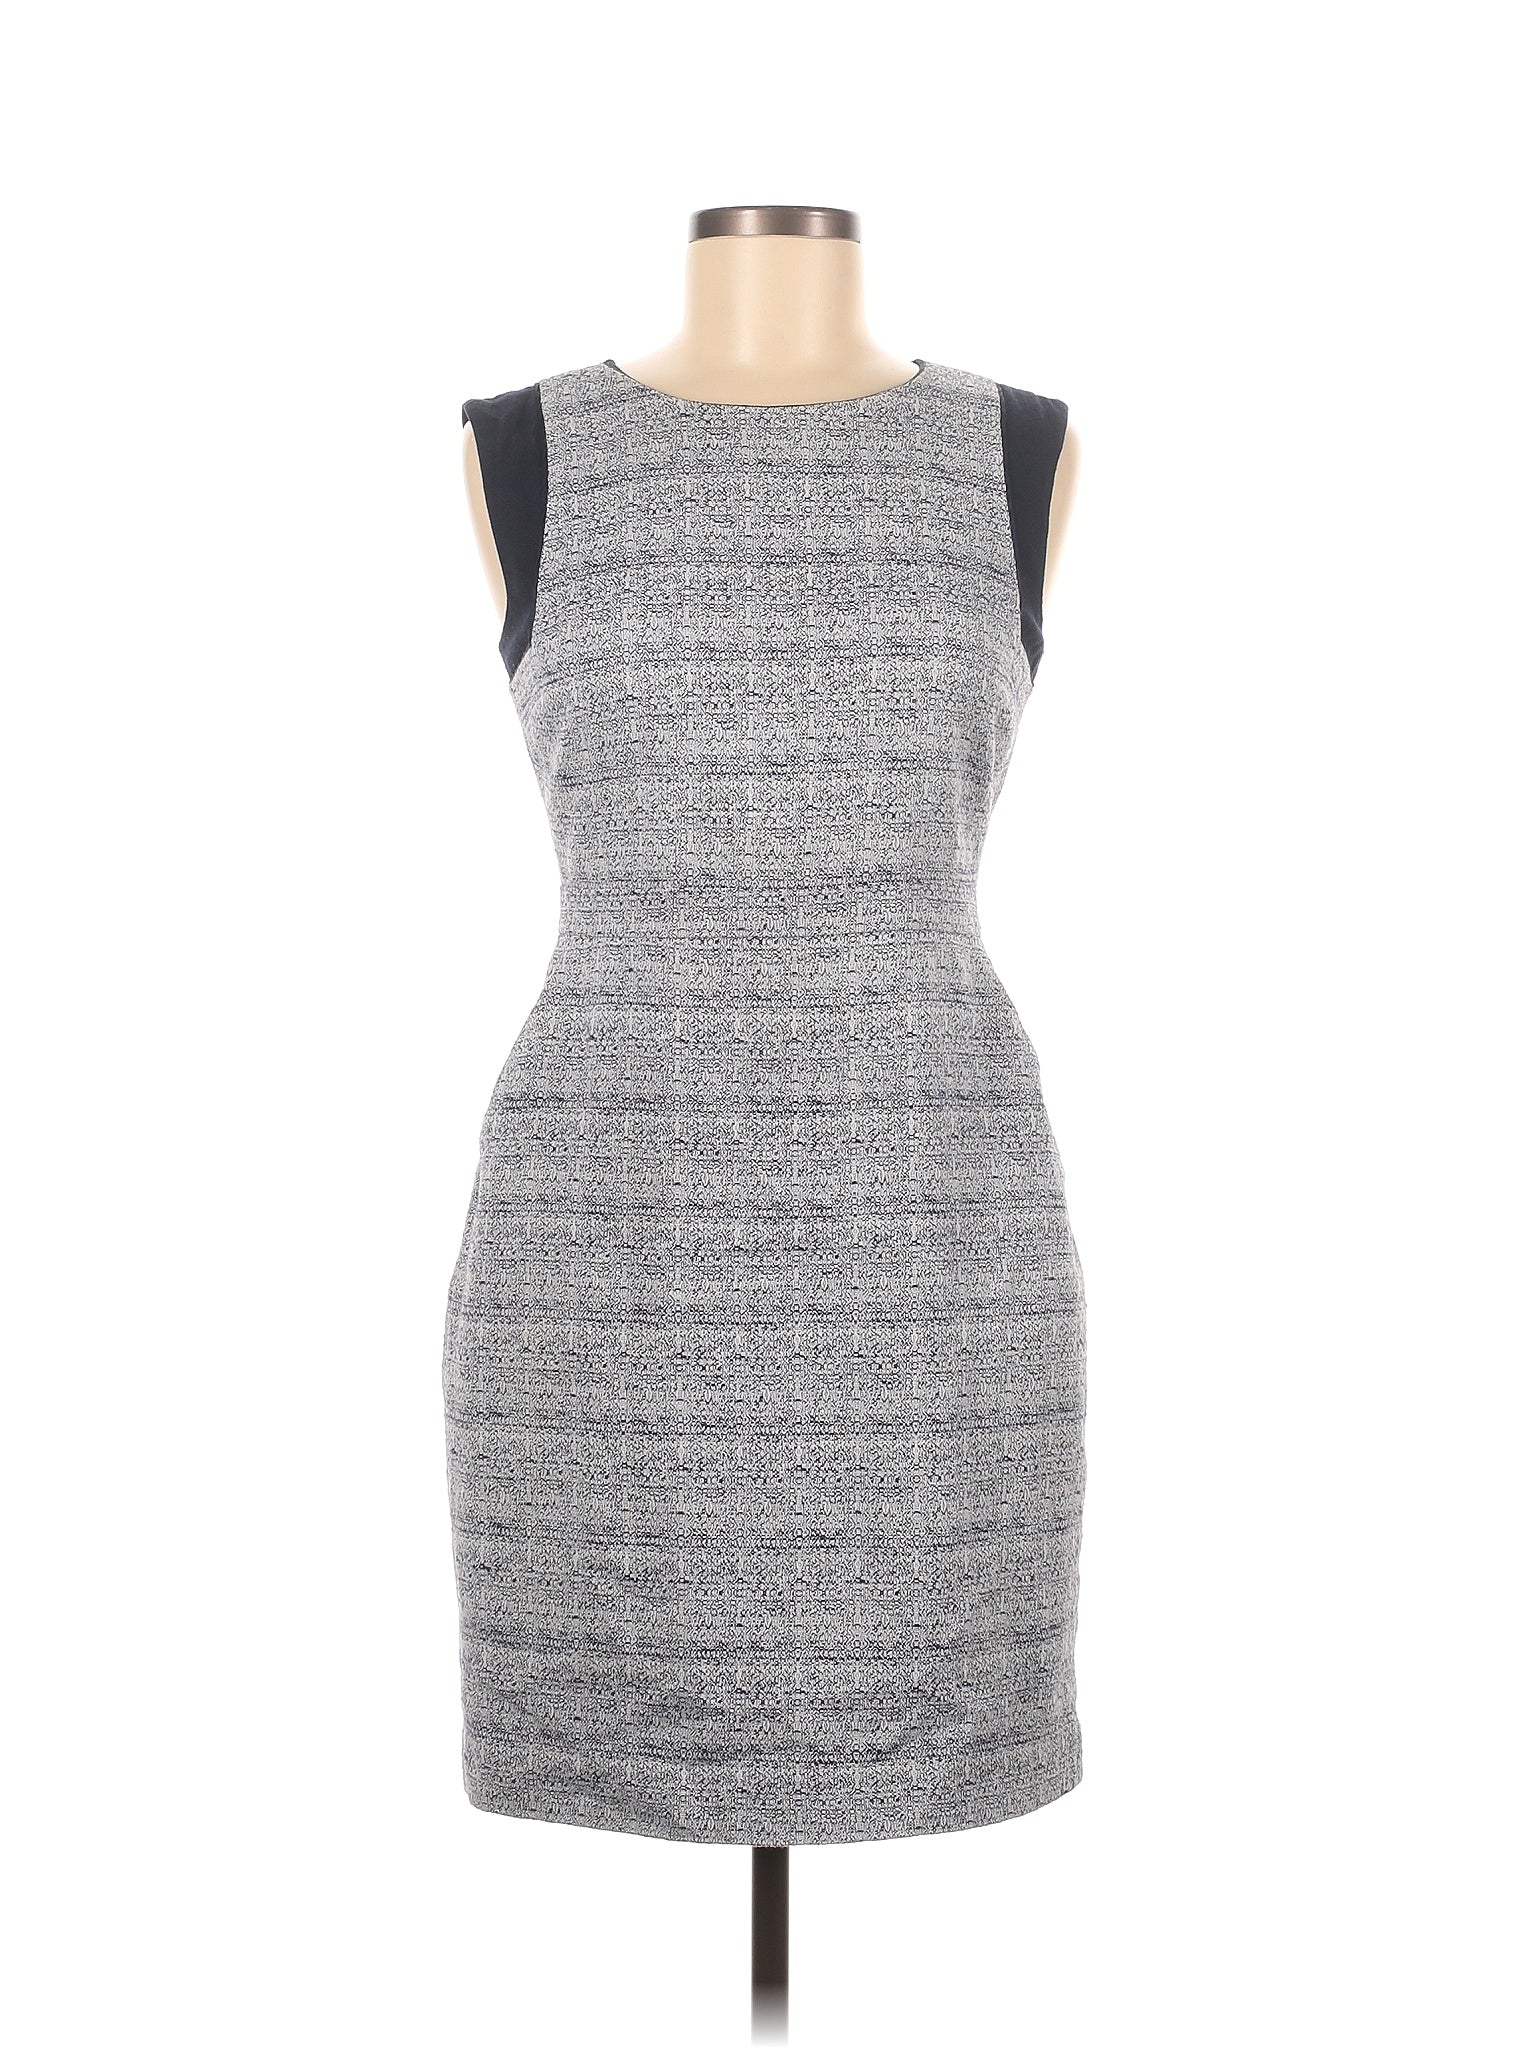 Casual Dress size - 6 P